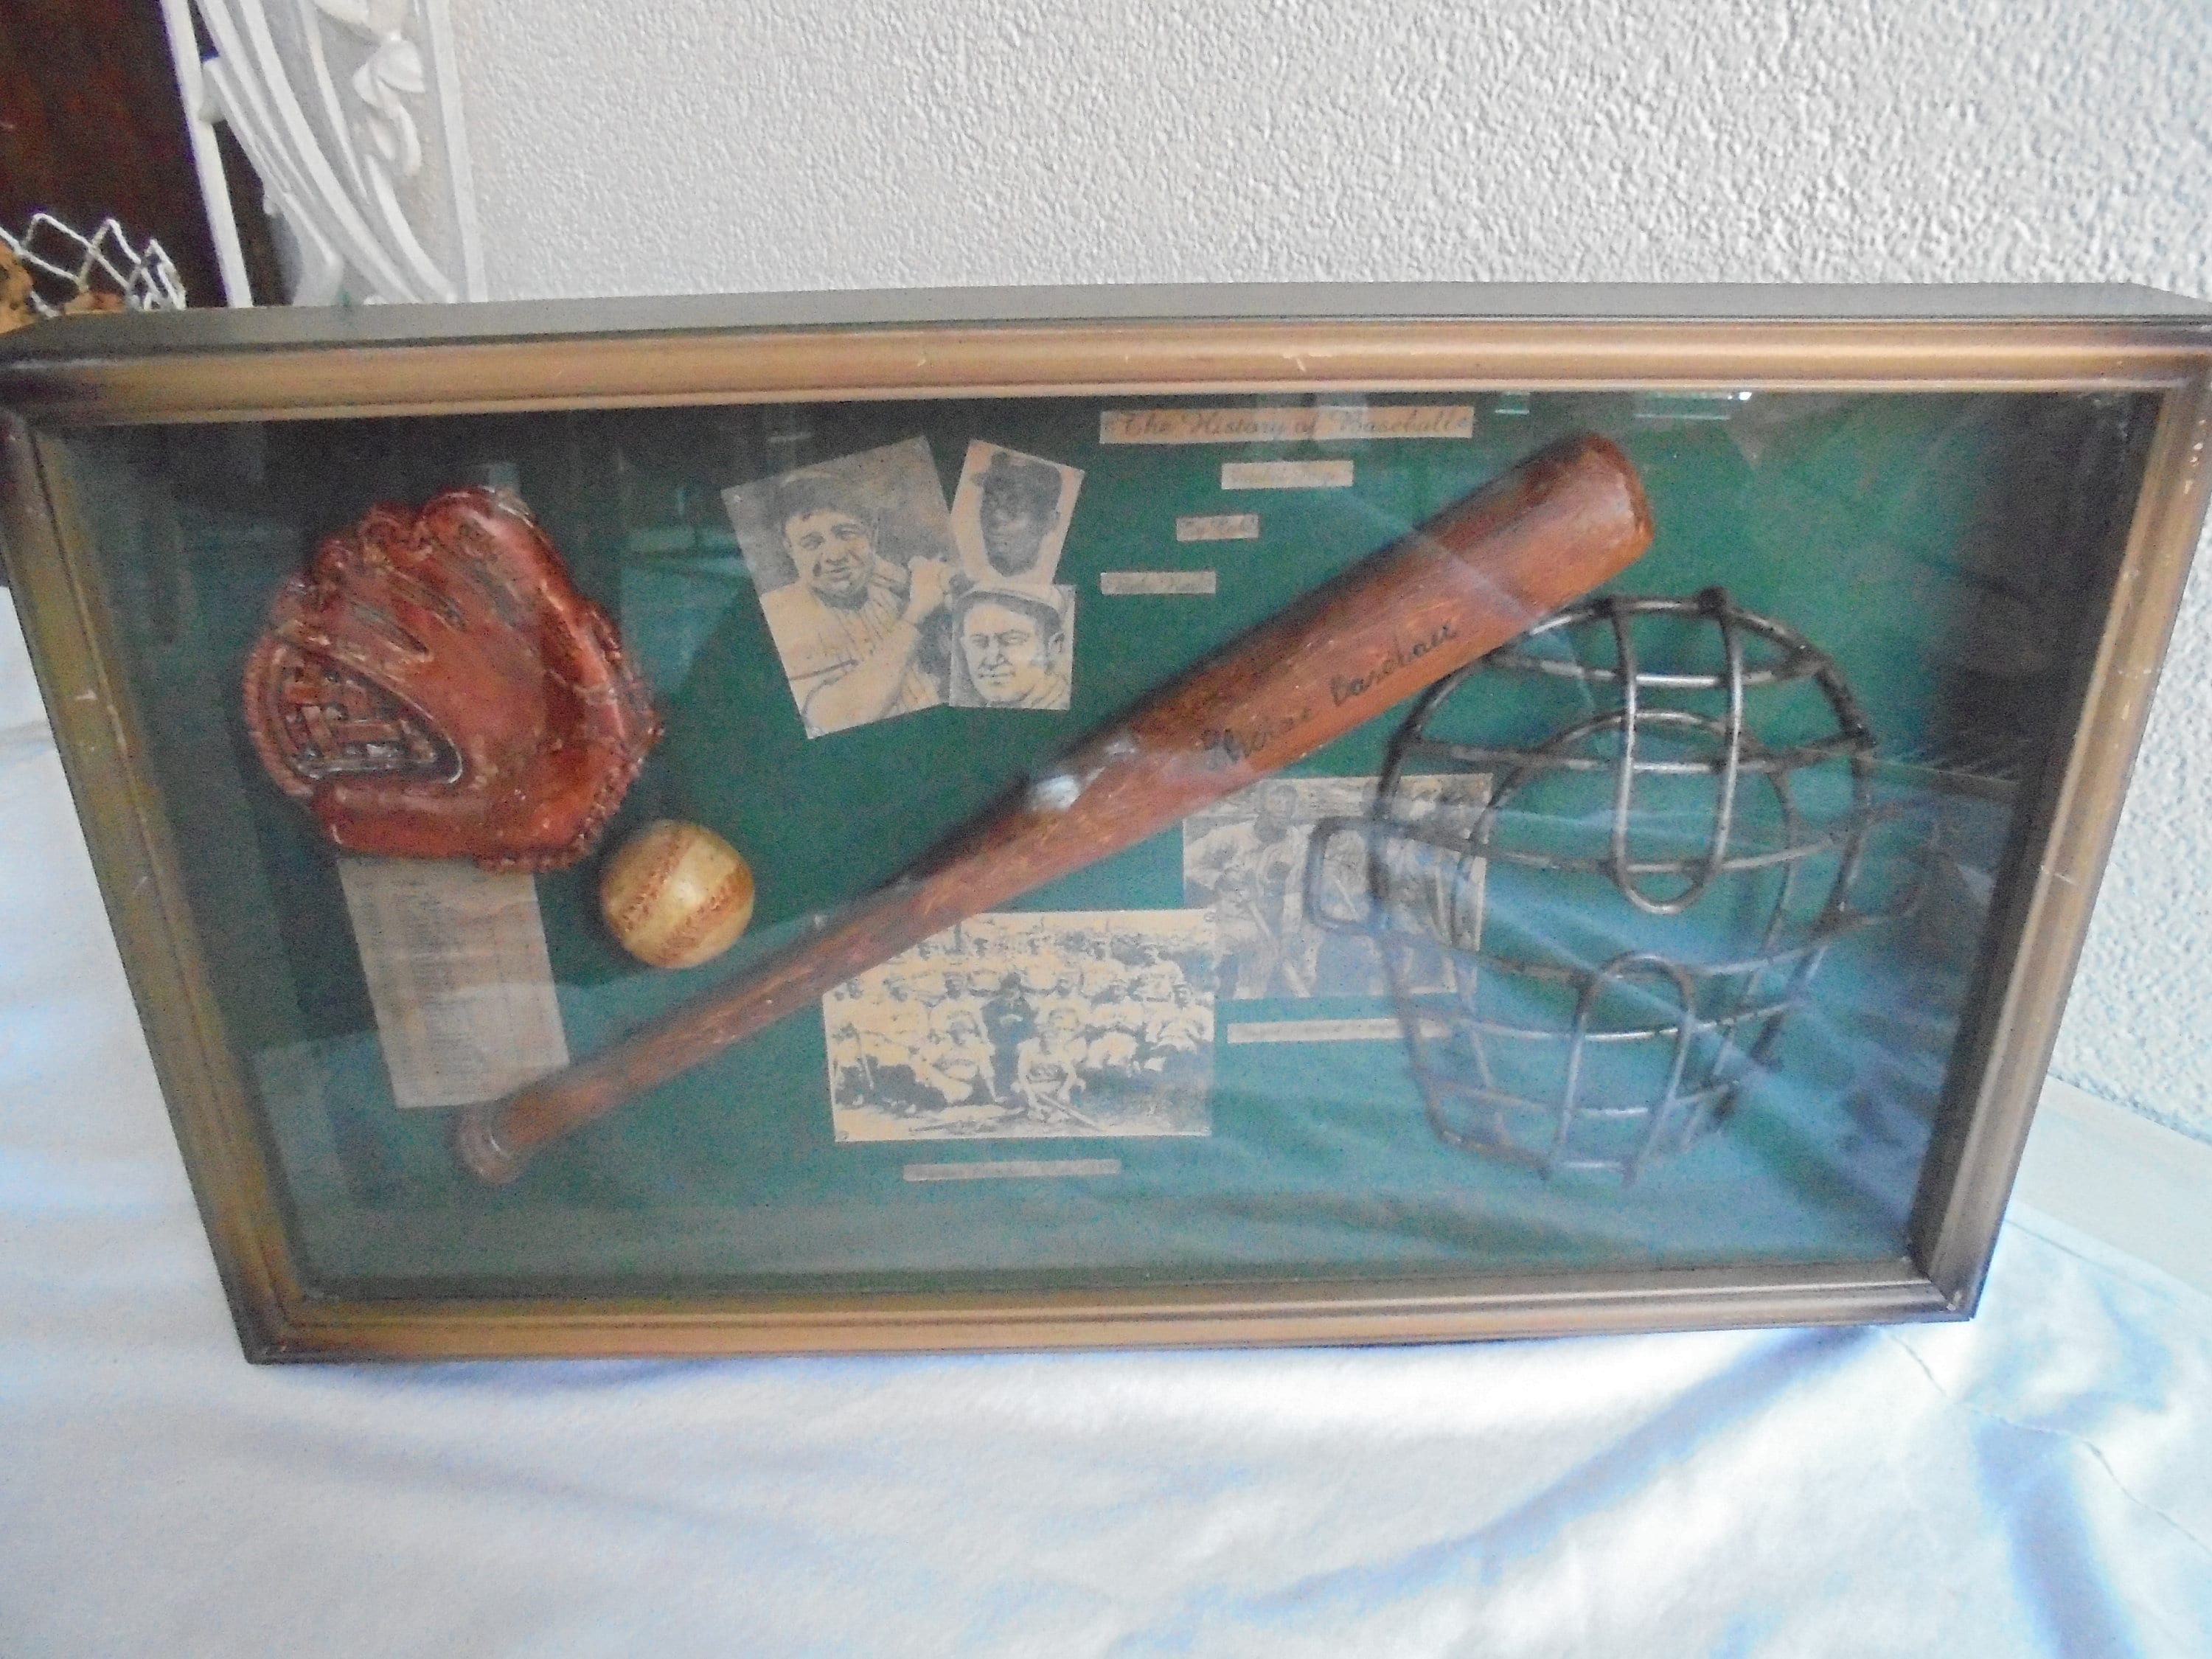 vintage base ball display casehistoty of base ballbase-ball is to collect the glass  case showcase cabinetbase  ball  history 1903-1933